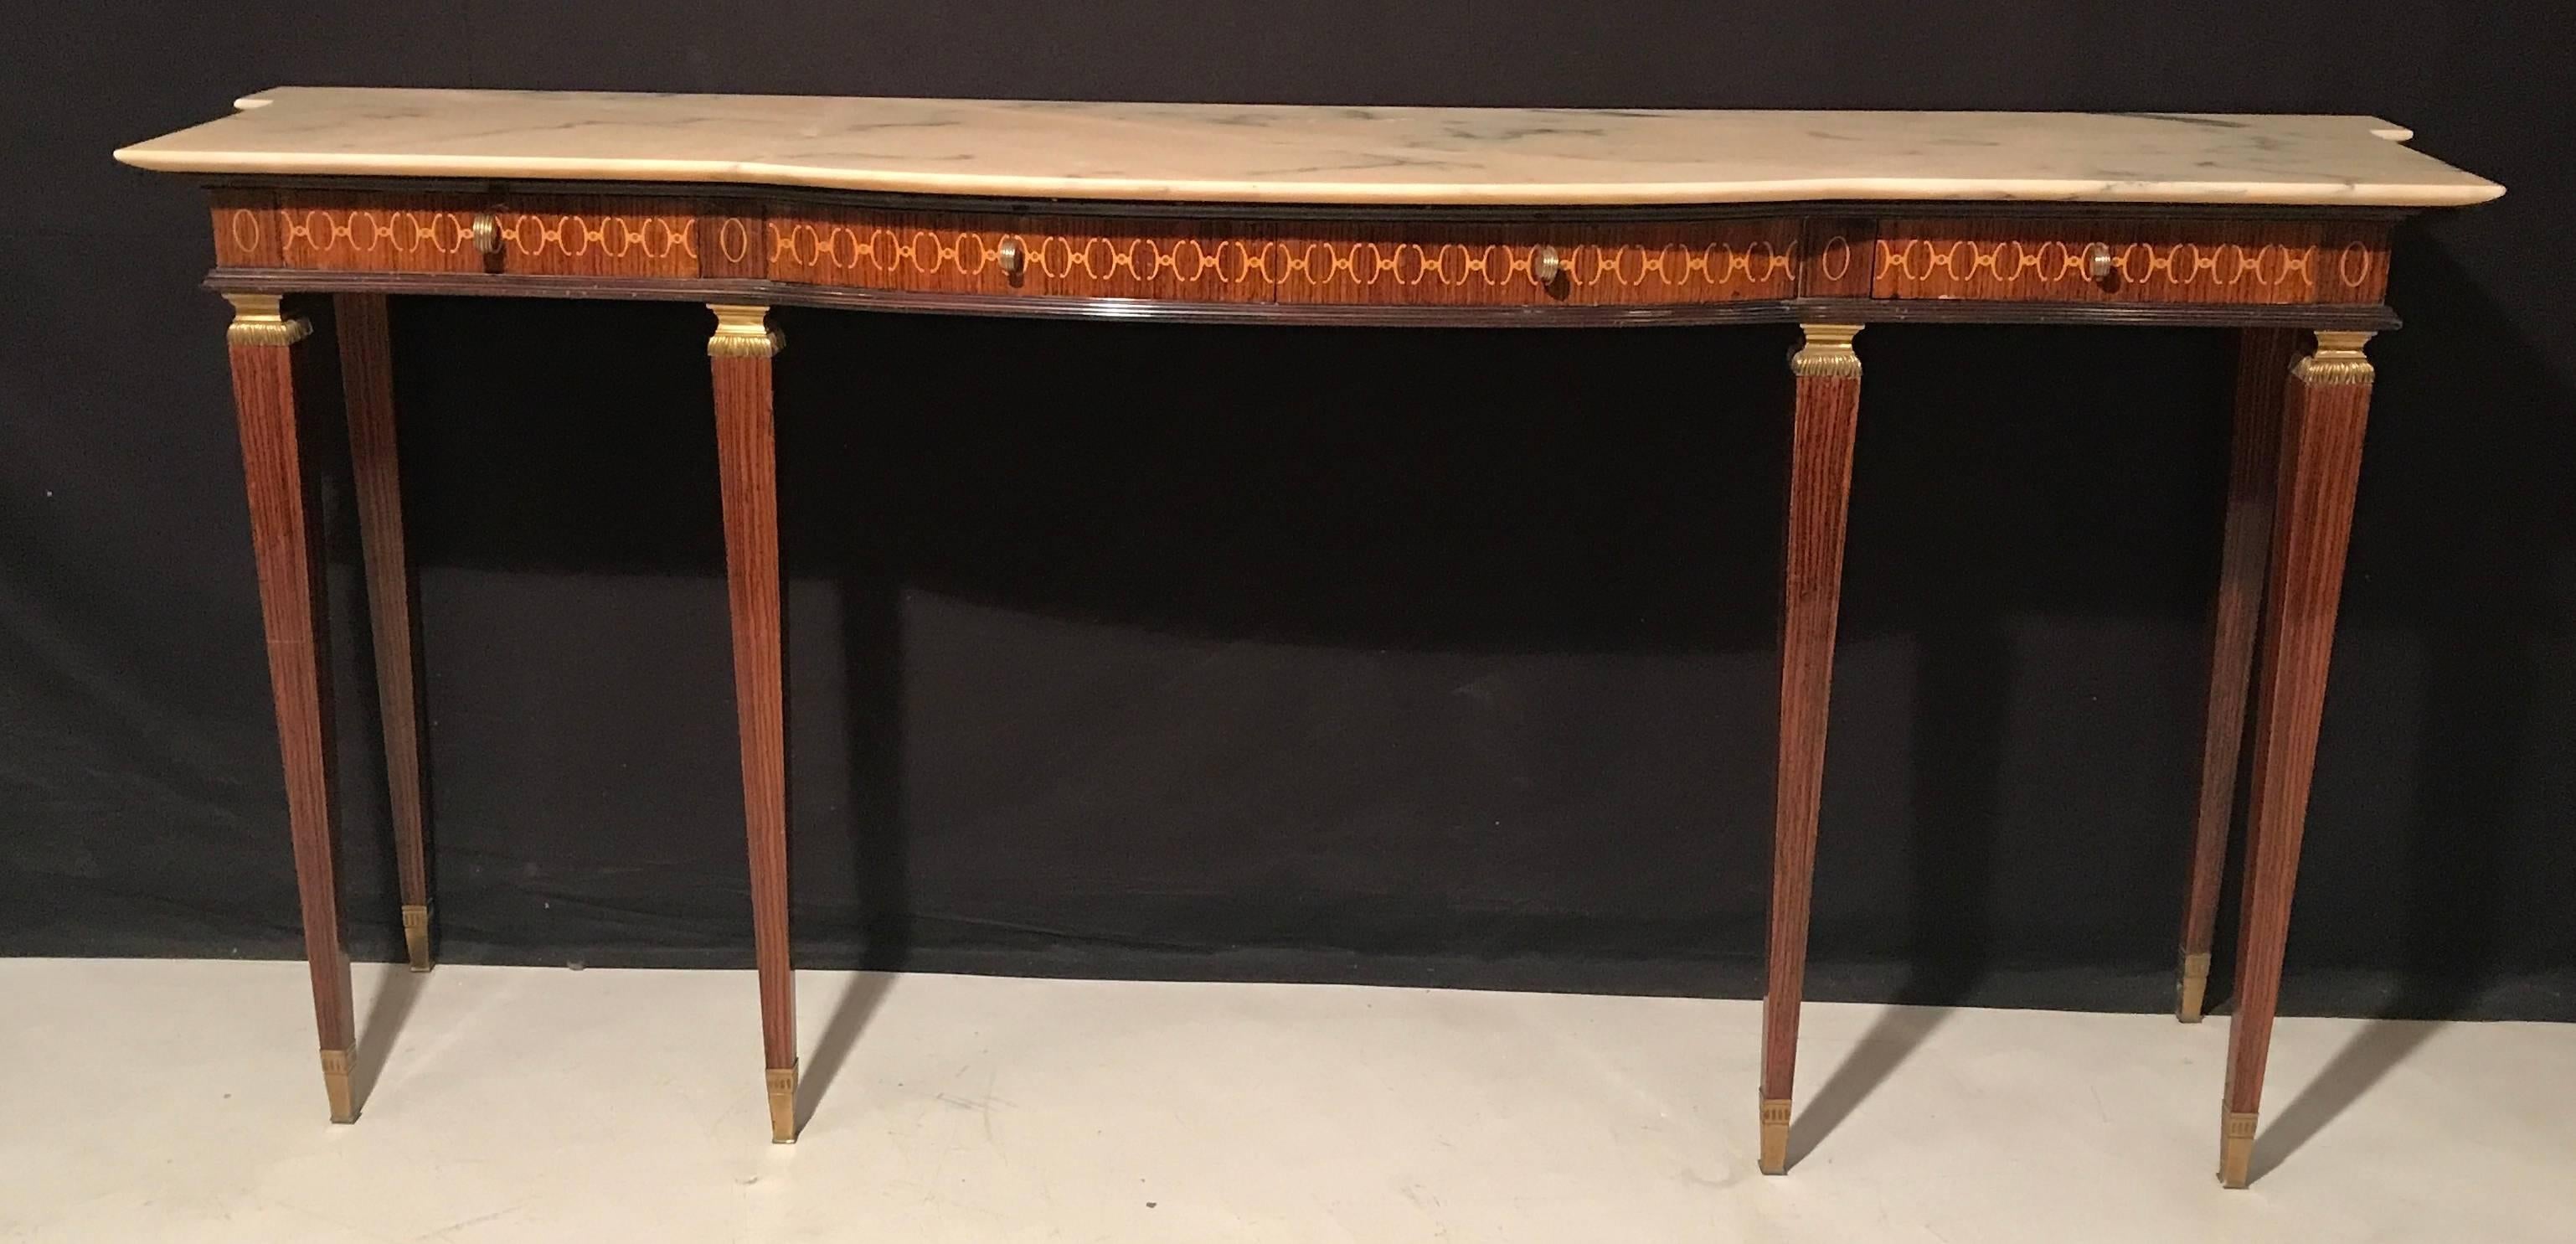 With a marble top, a frieze marquetry inlaid in geometric form with four drawers. Square tapering legs with finely chiseled bronze mounts.
Designer, Paolo buffa.